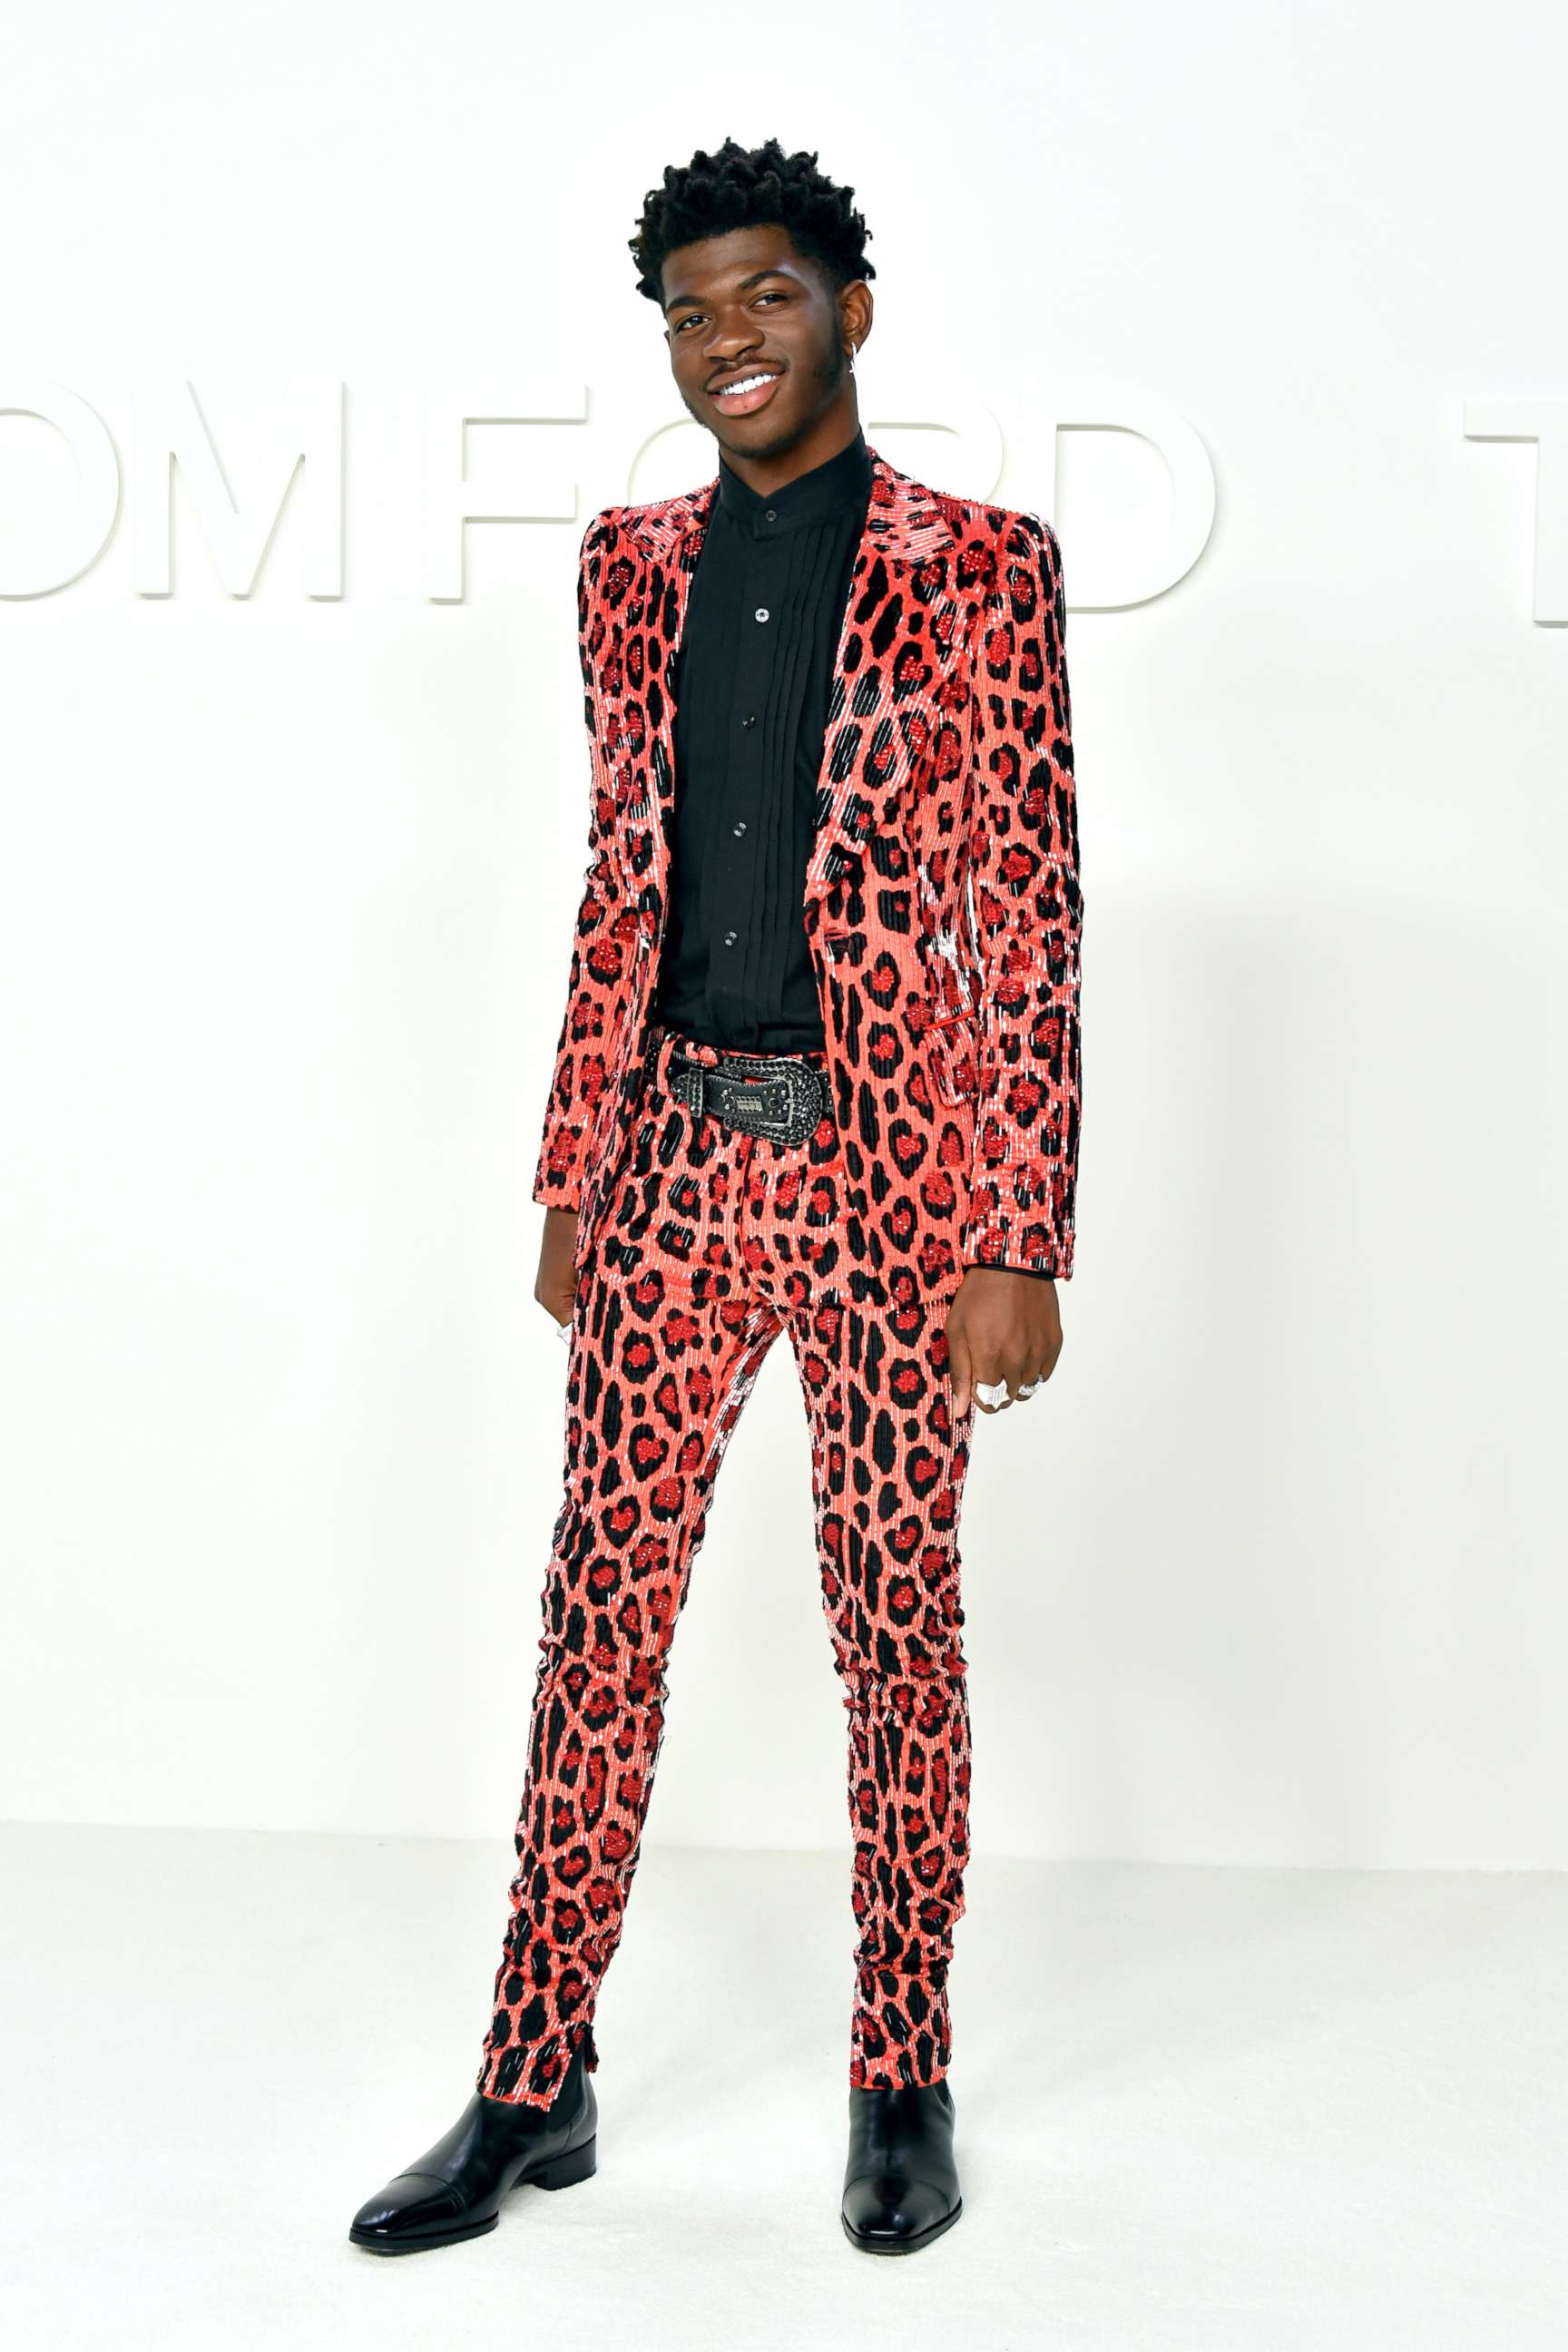 PHOTO: HOLLYWOOD, CALIFORNIA - FEBRUARY 07: Lil Nas X attends the Tom Ford AW20 Show at Milk Studios on February 07, 2020 in Hollywood, California.